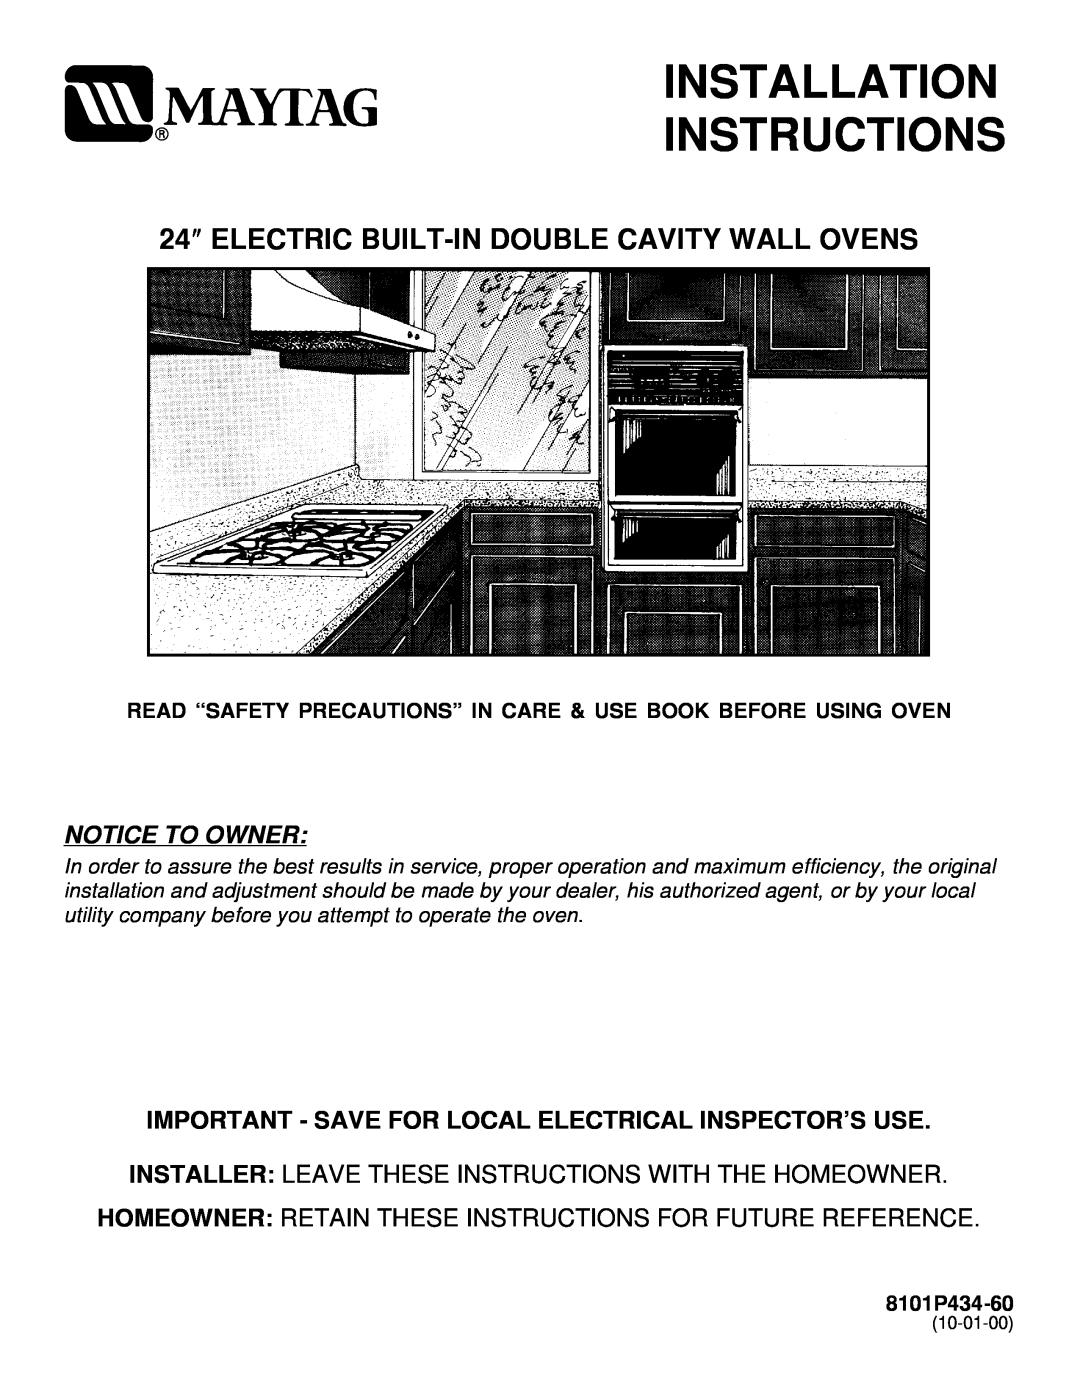 Magic Chef Electric Built-In Double Cavity Wall Oven installation instructions Installation Instructions, Notice To Owner 